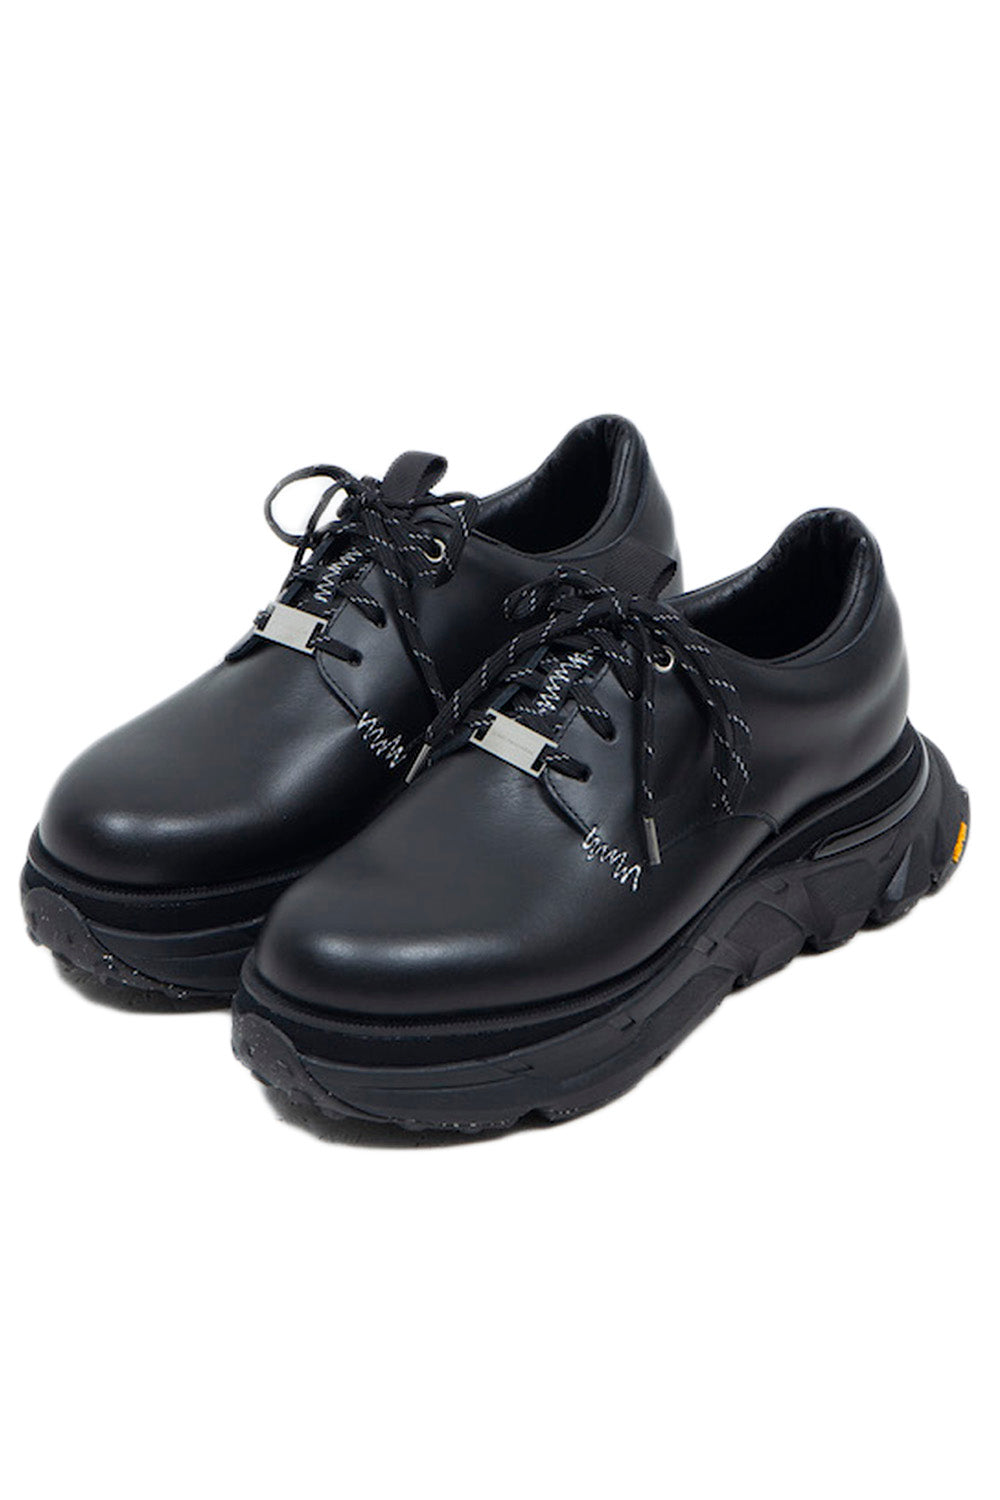 *Limited Edition* *Reprint Edition* LBLM-SHOES01 | Stitchwork Docking Leather Shoes | BLACK